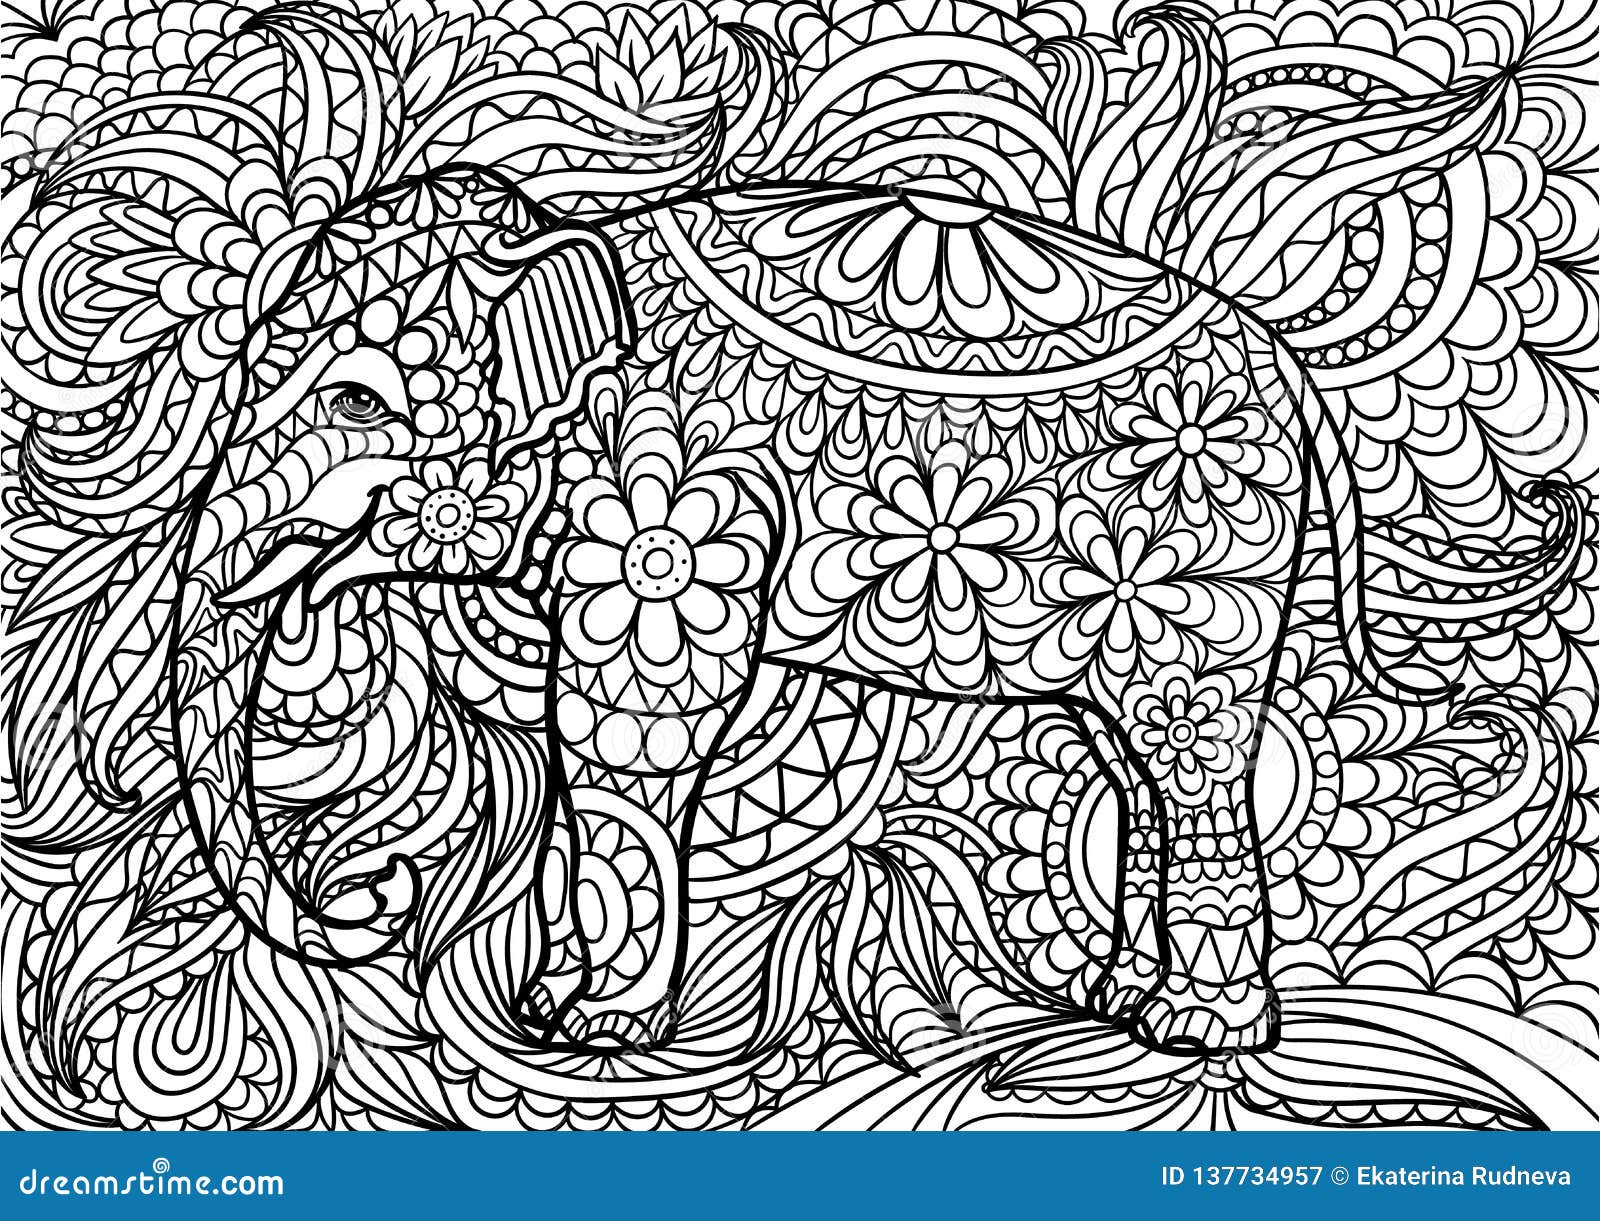 Indian Elephant Doodle Coloring for Adults. Hand Drawn Doodle. Stock ...